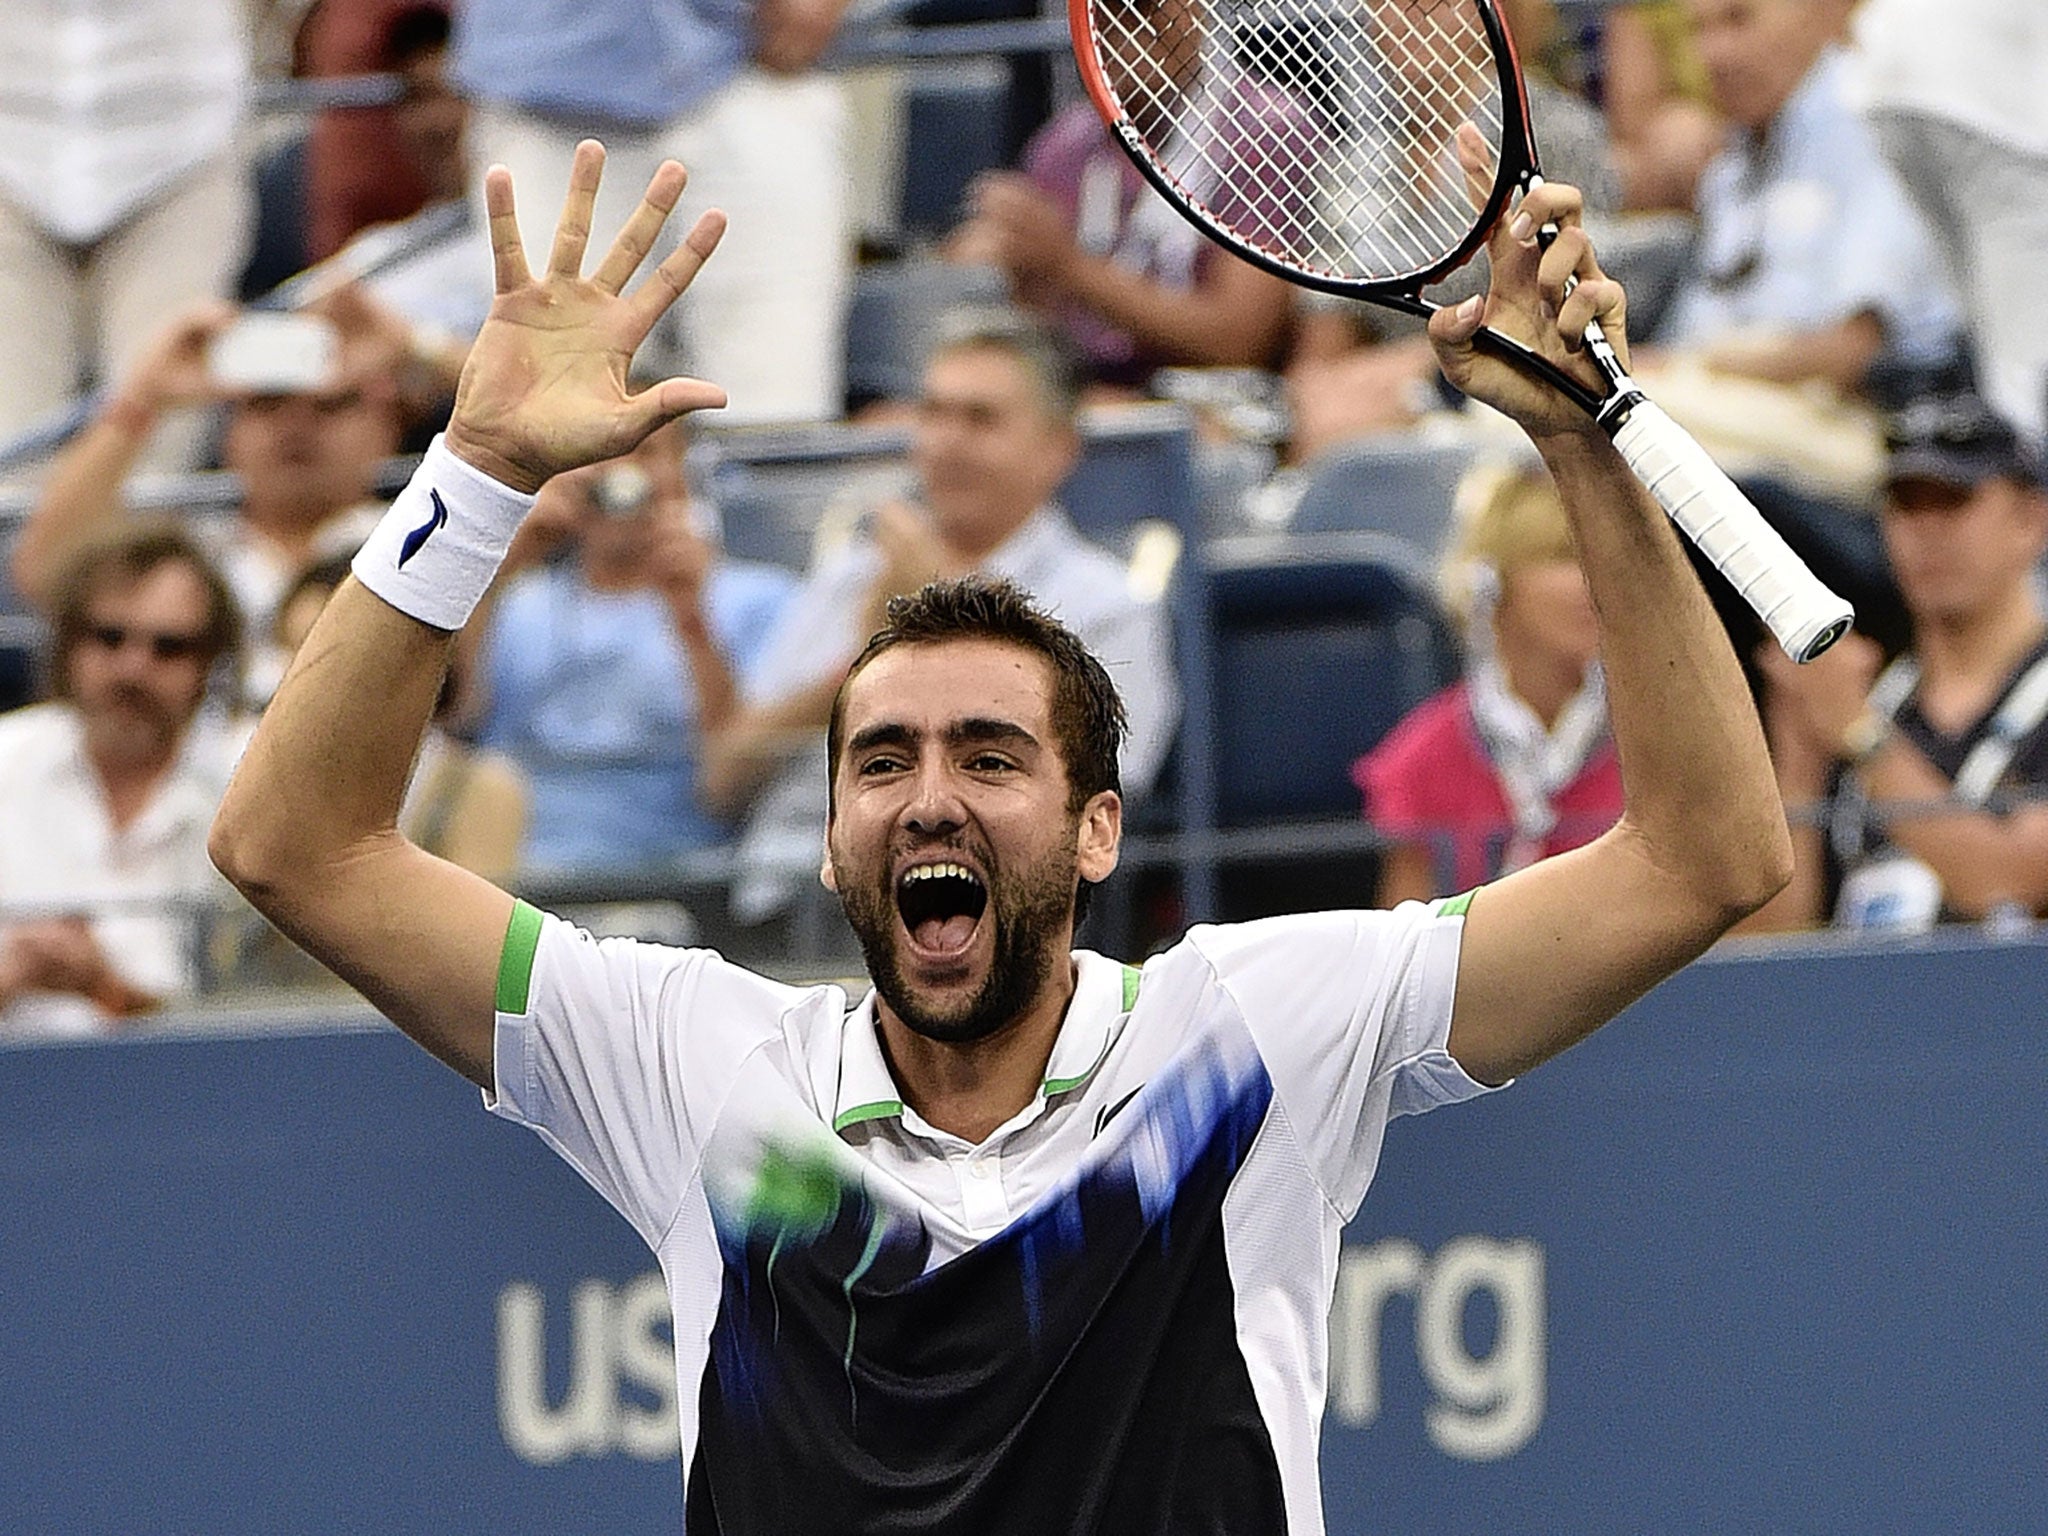 Marin Cilic’s victory represents a further changing of the guard in the men’s game